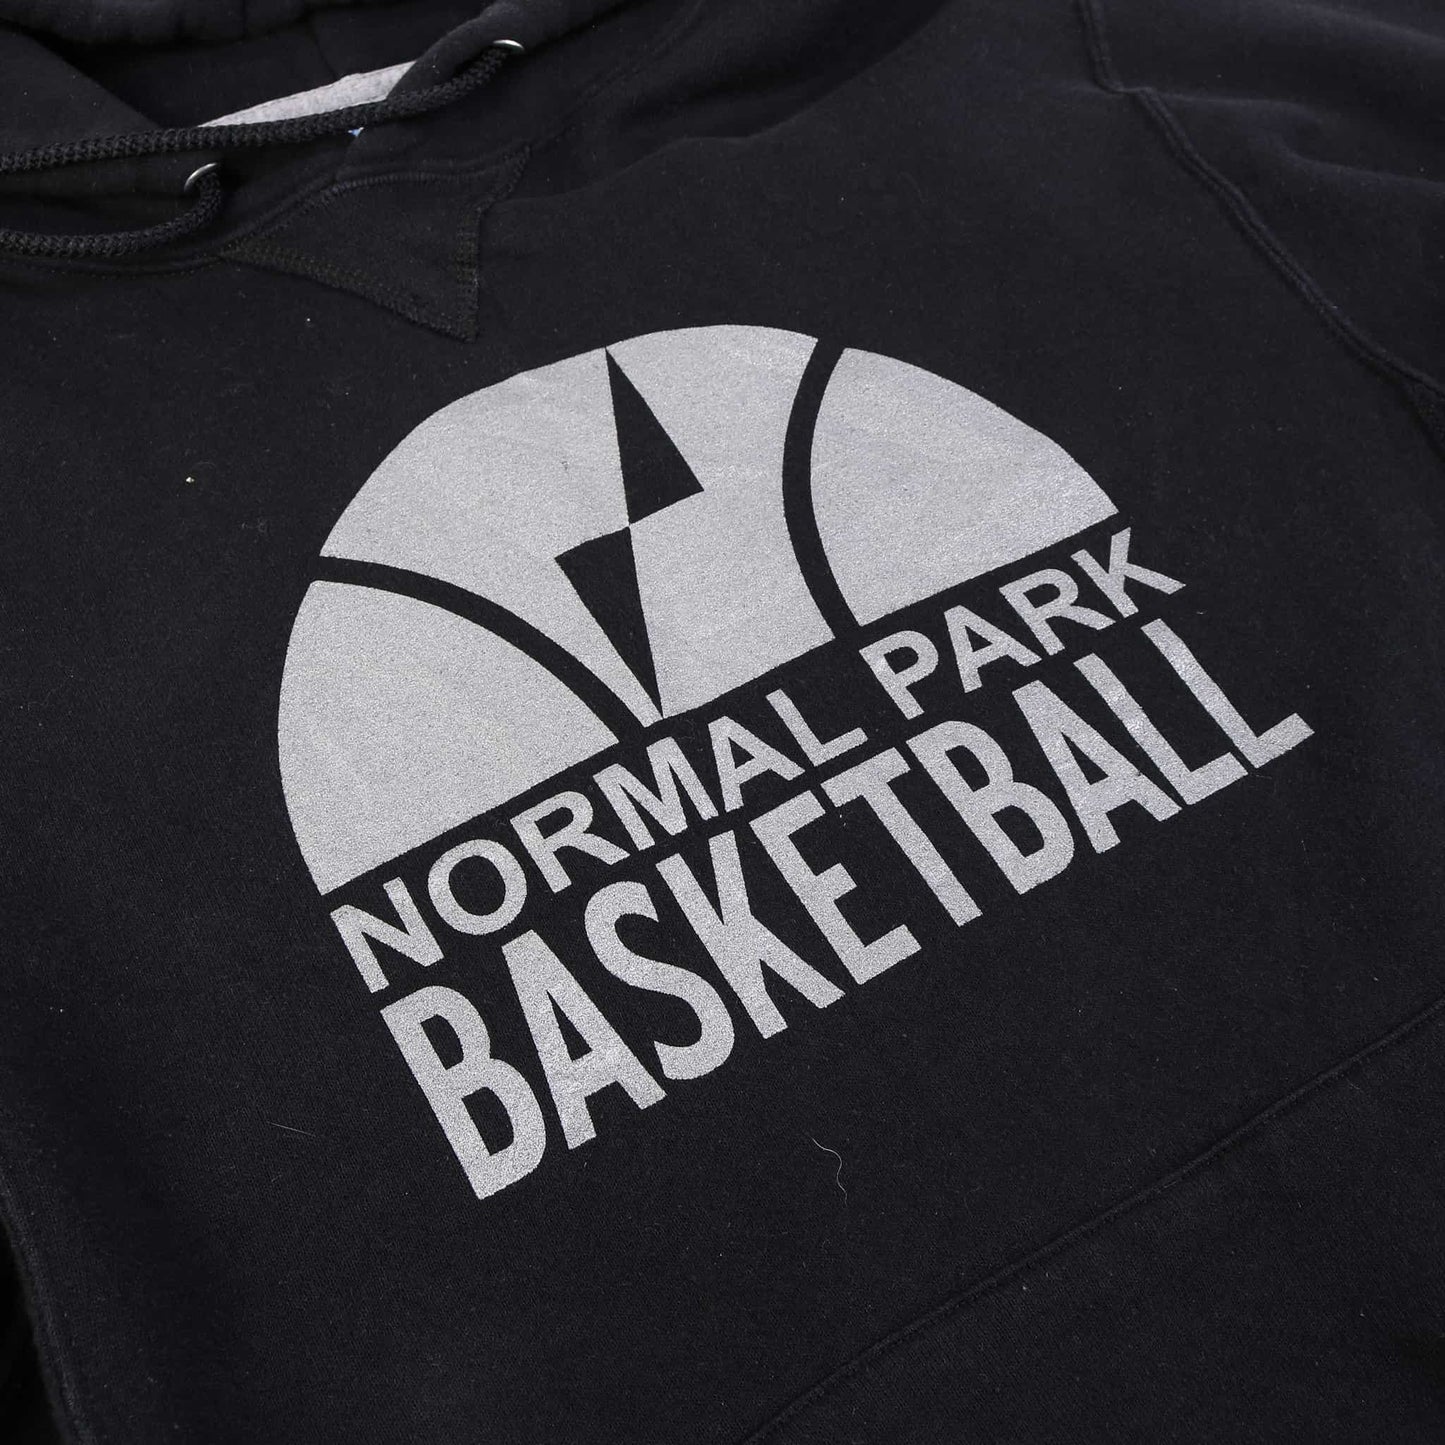 Vintage Russell Athletic 'Normal Park Basketball' Hooded Sweatshirt - Black - American Madness